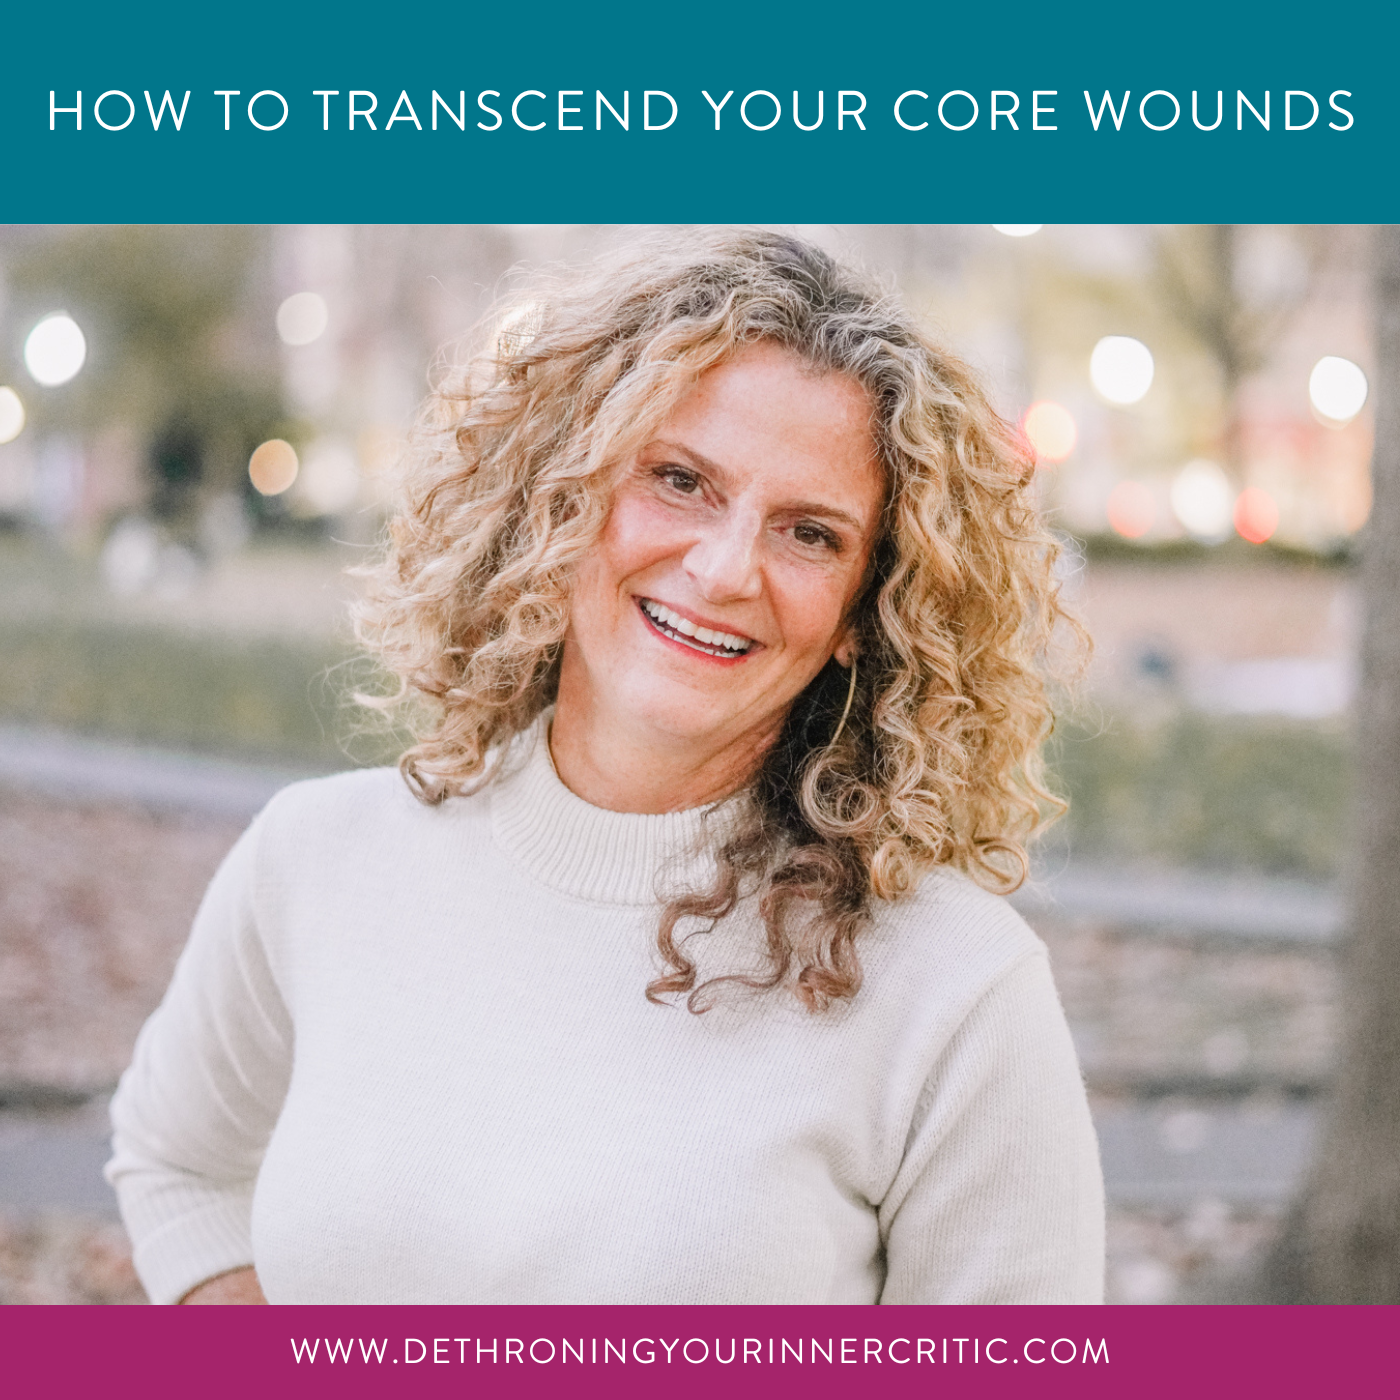 How to Transcend your Core Wounds